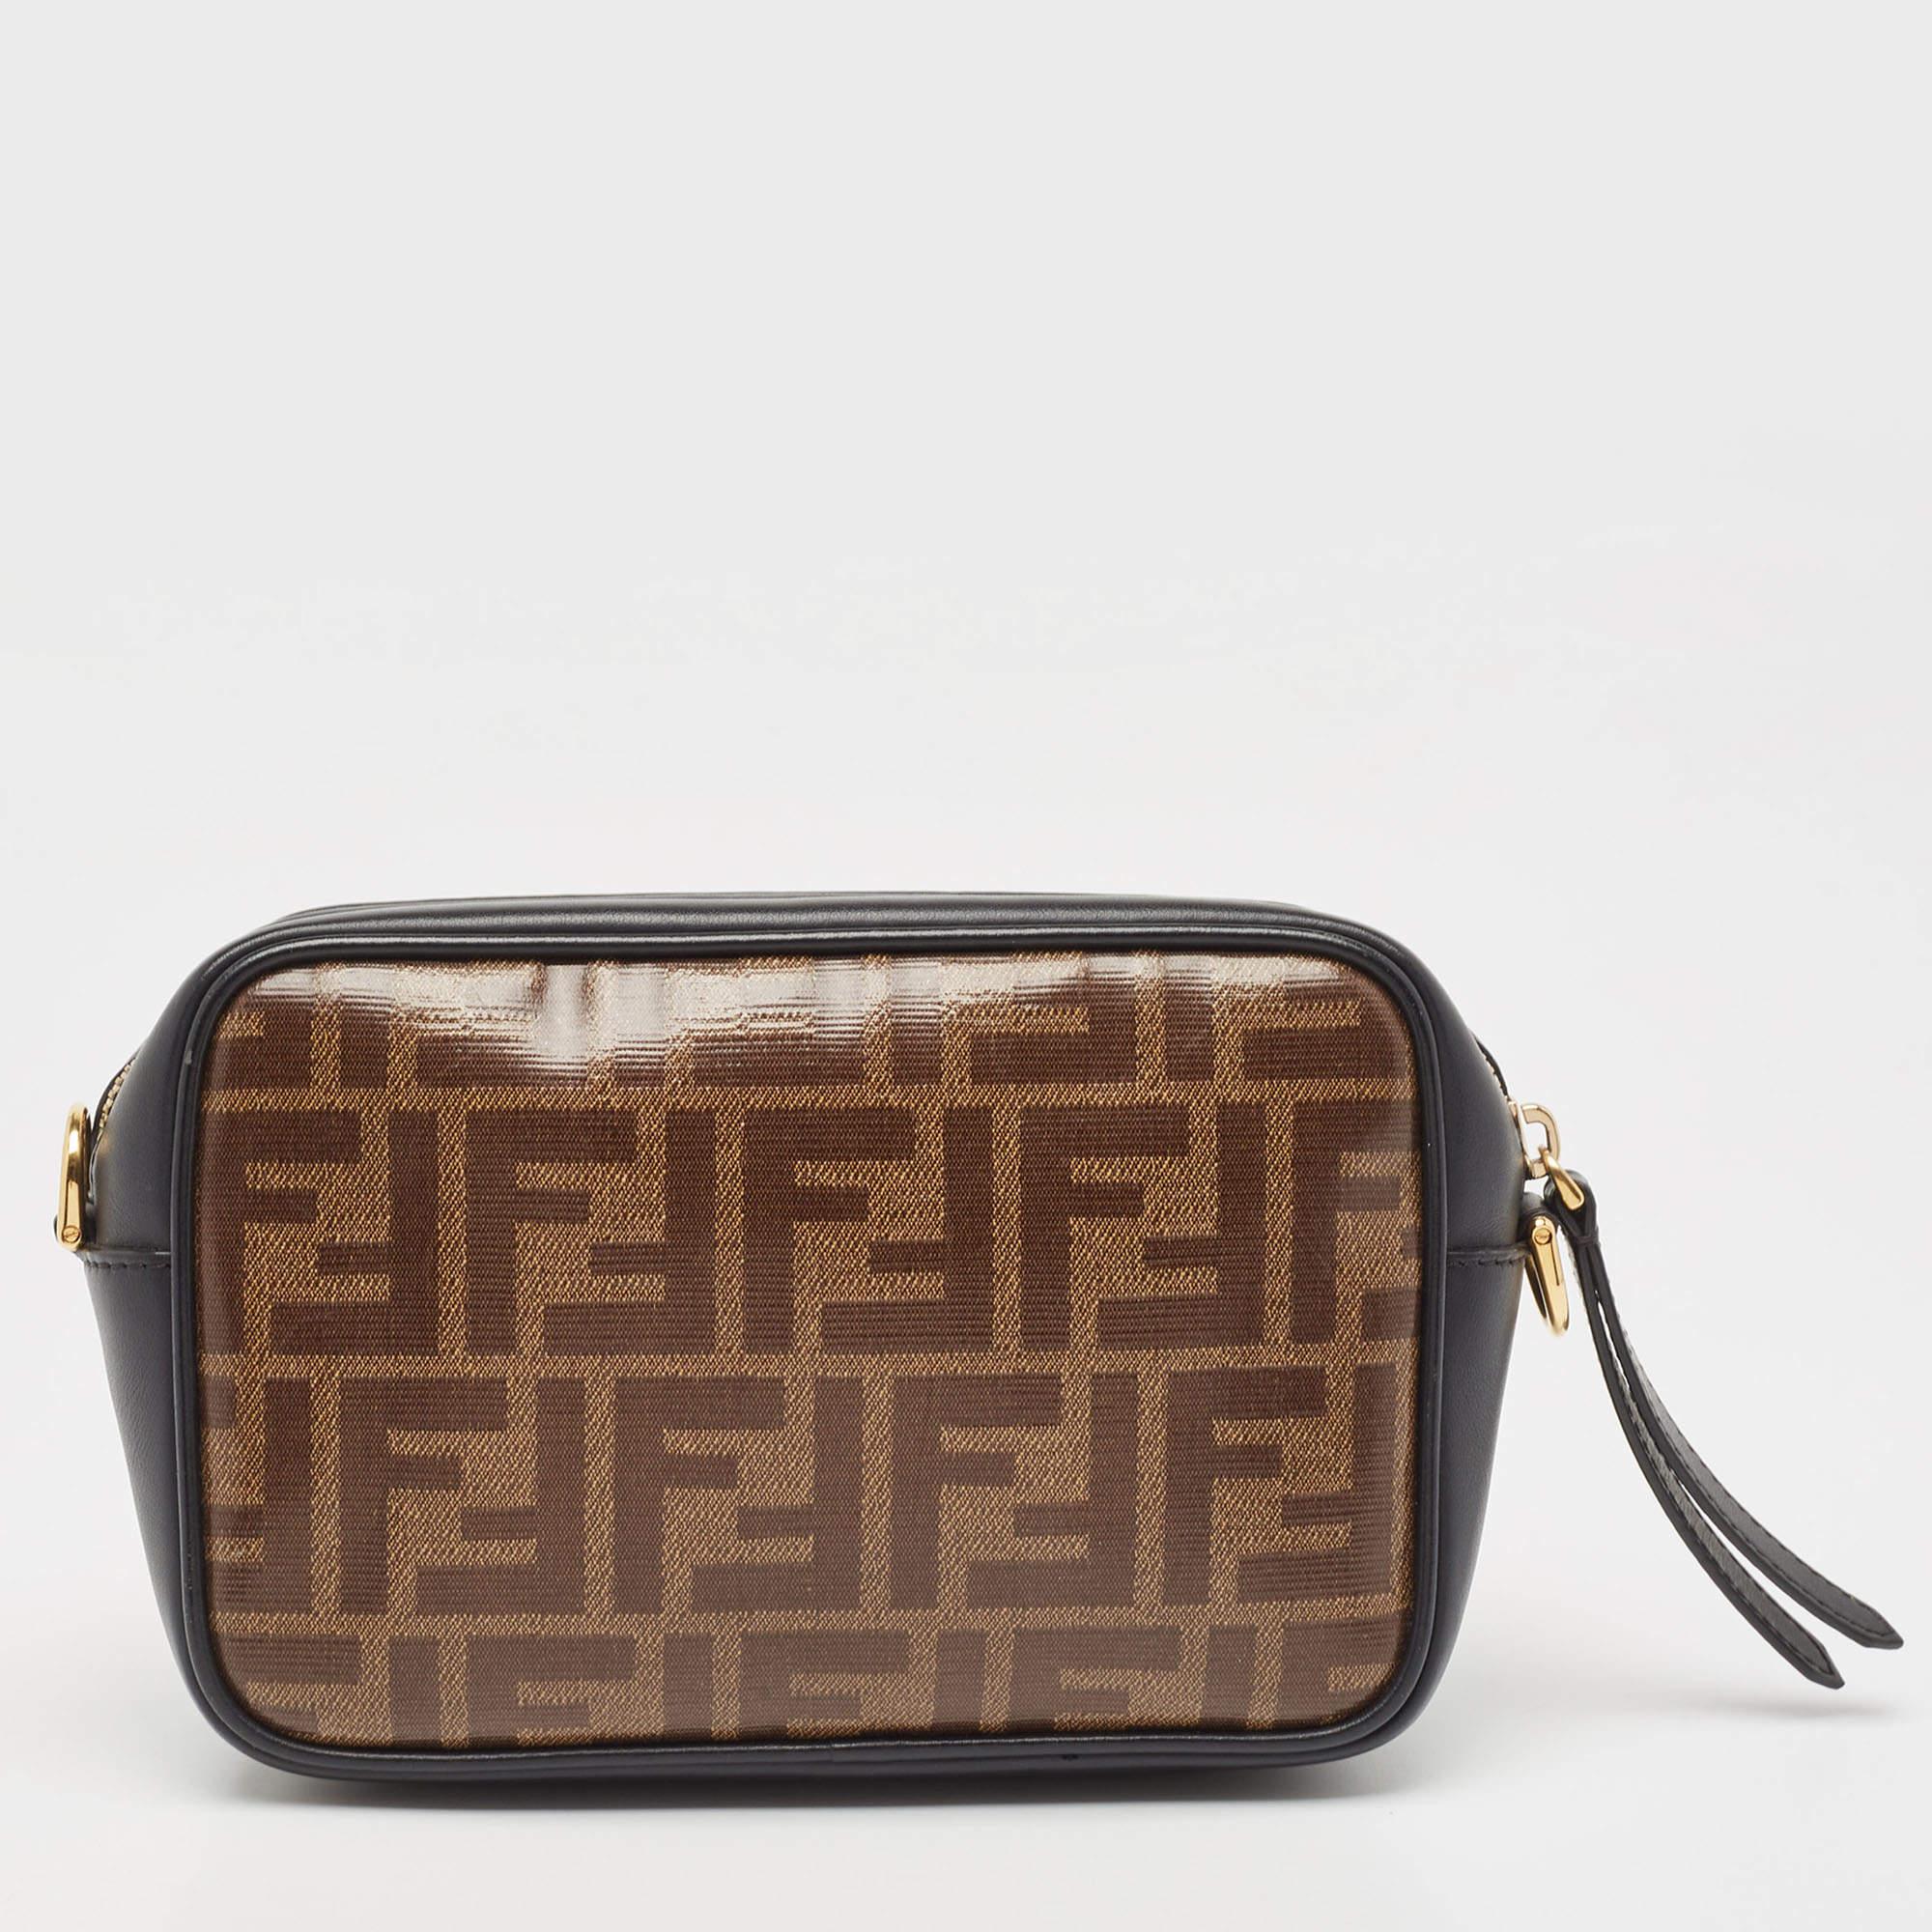 This Fendi handbag will elevate your style quotient and take it a notch higher. Carry this camera bag without compromising on style. This Zucca canvas & leather bag comes in a simple style with the logo on the front. This chic bag opens to a